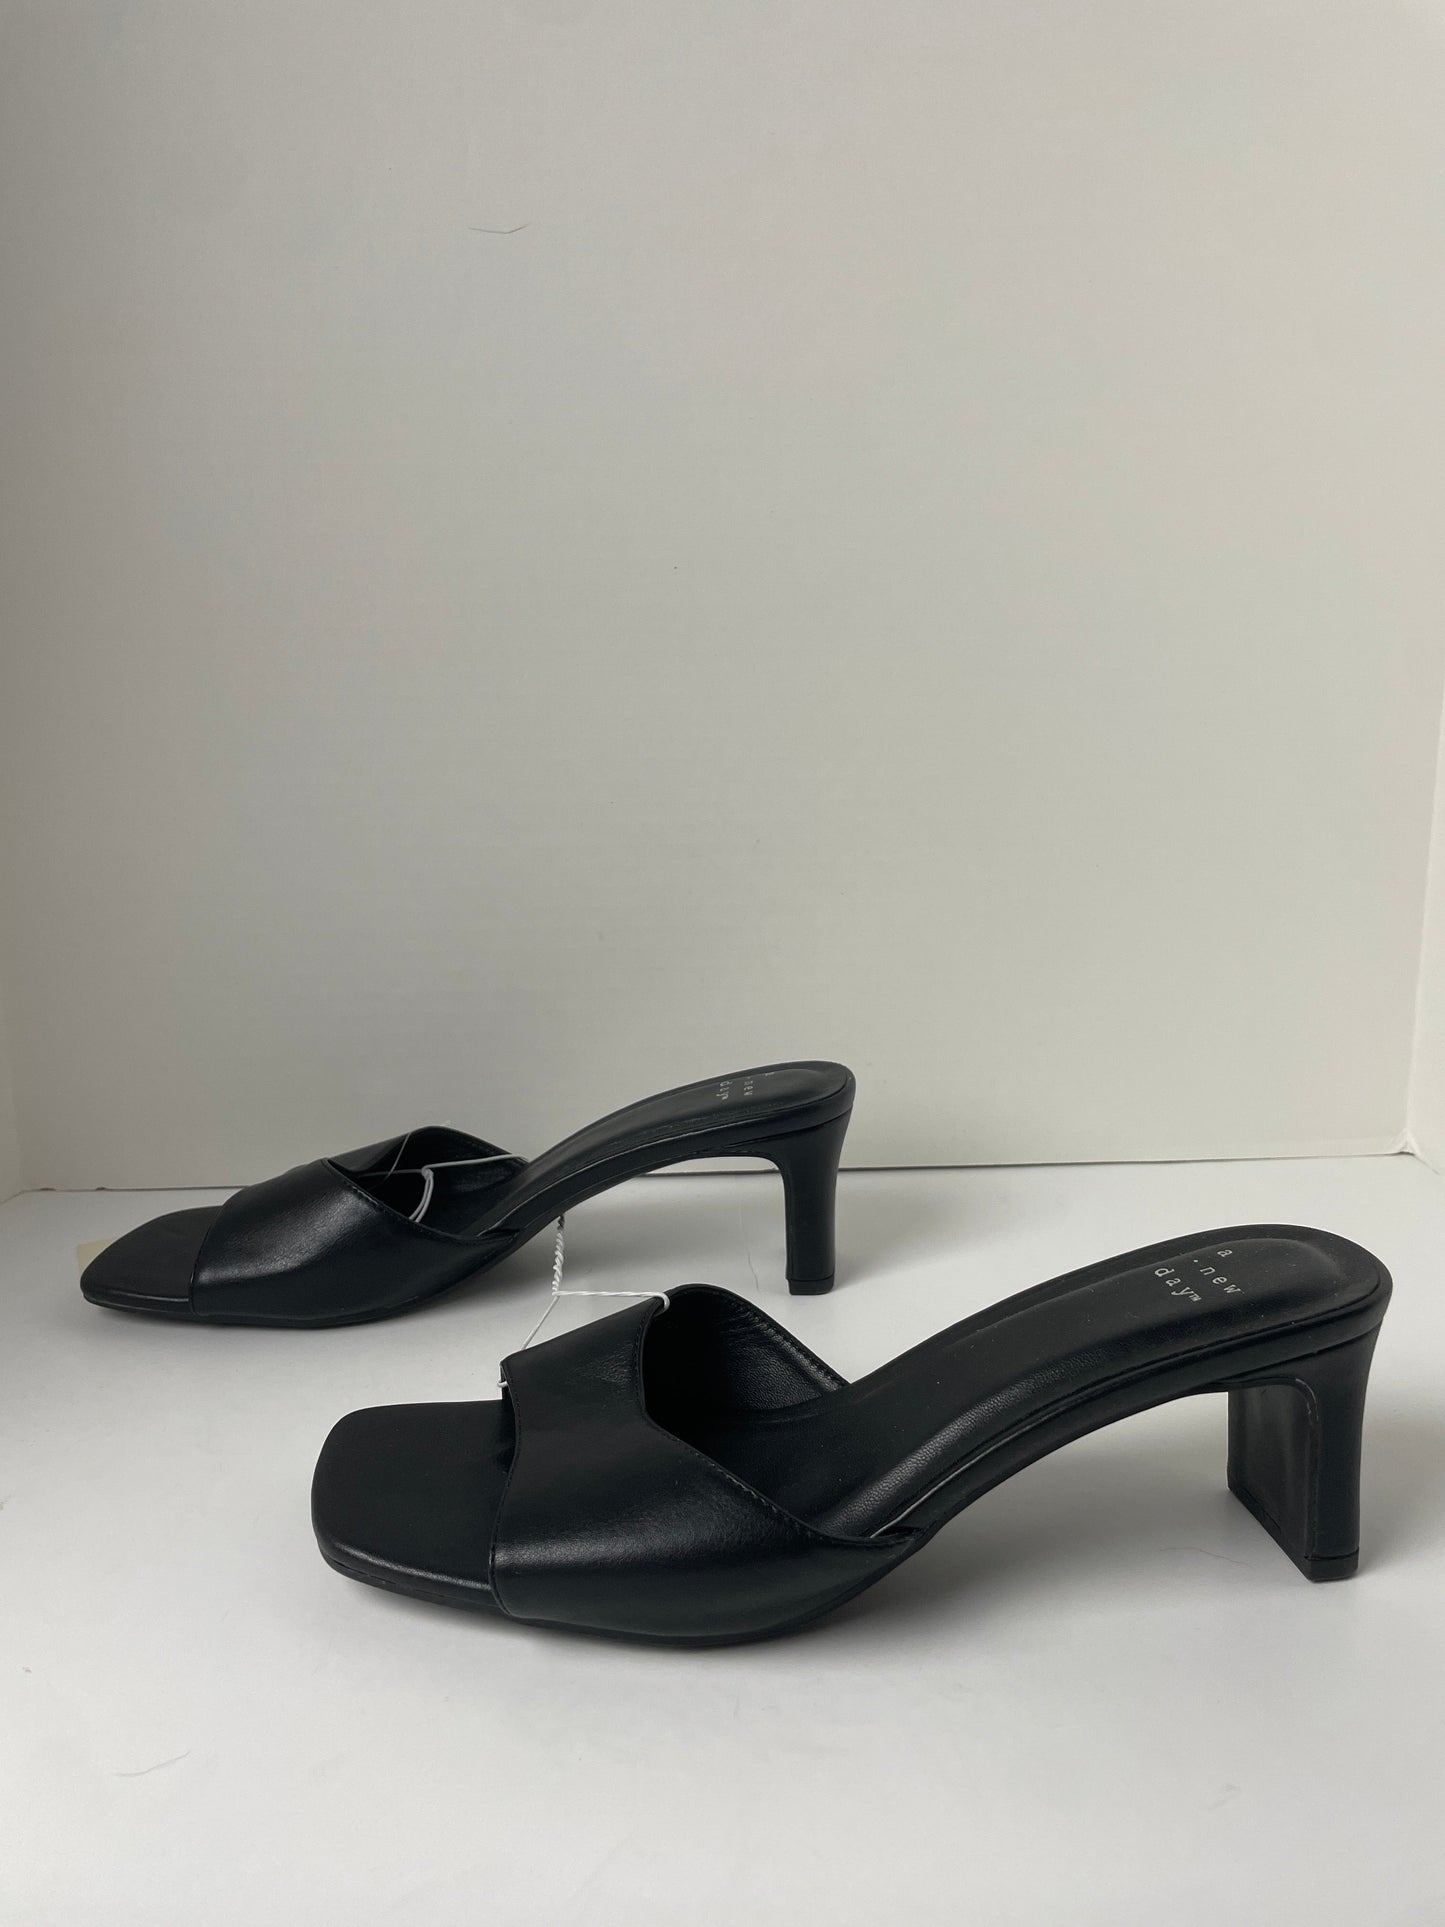 Black Shoes Heels Kitten A New Day, Size 9